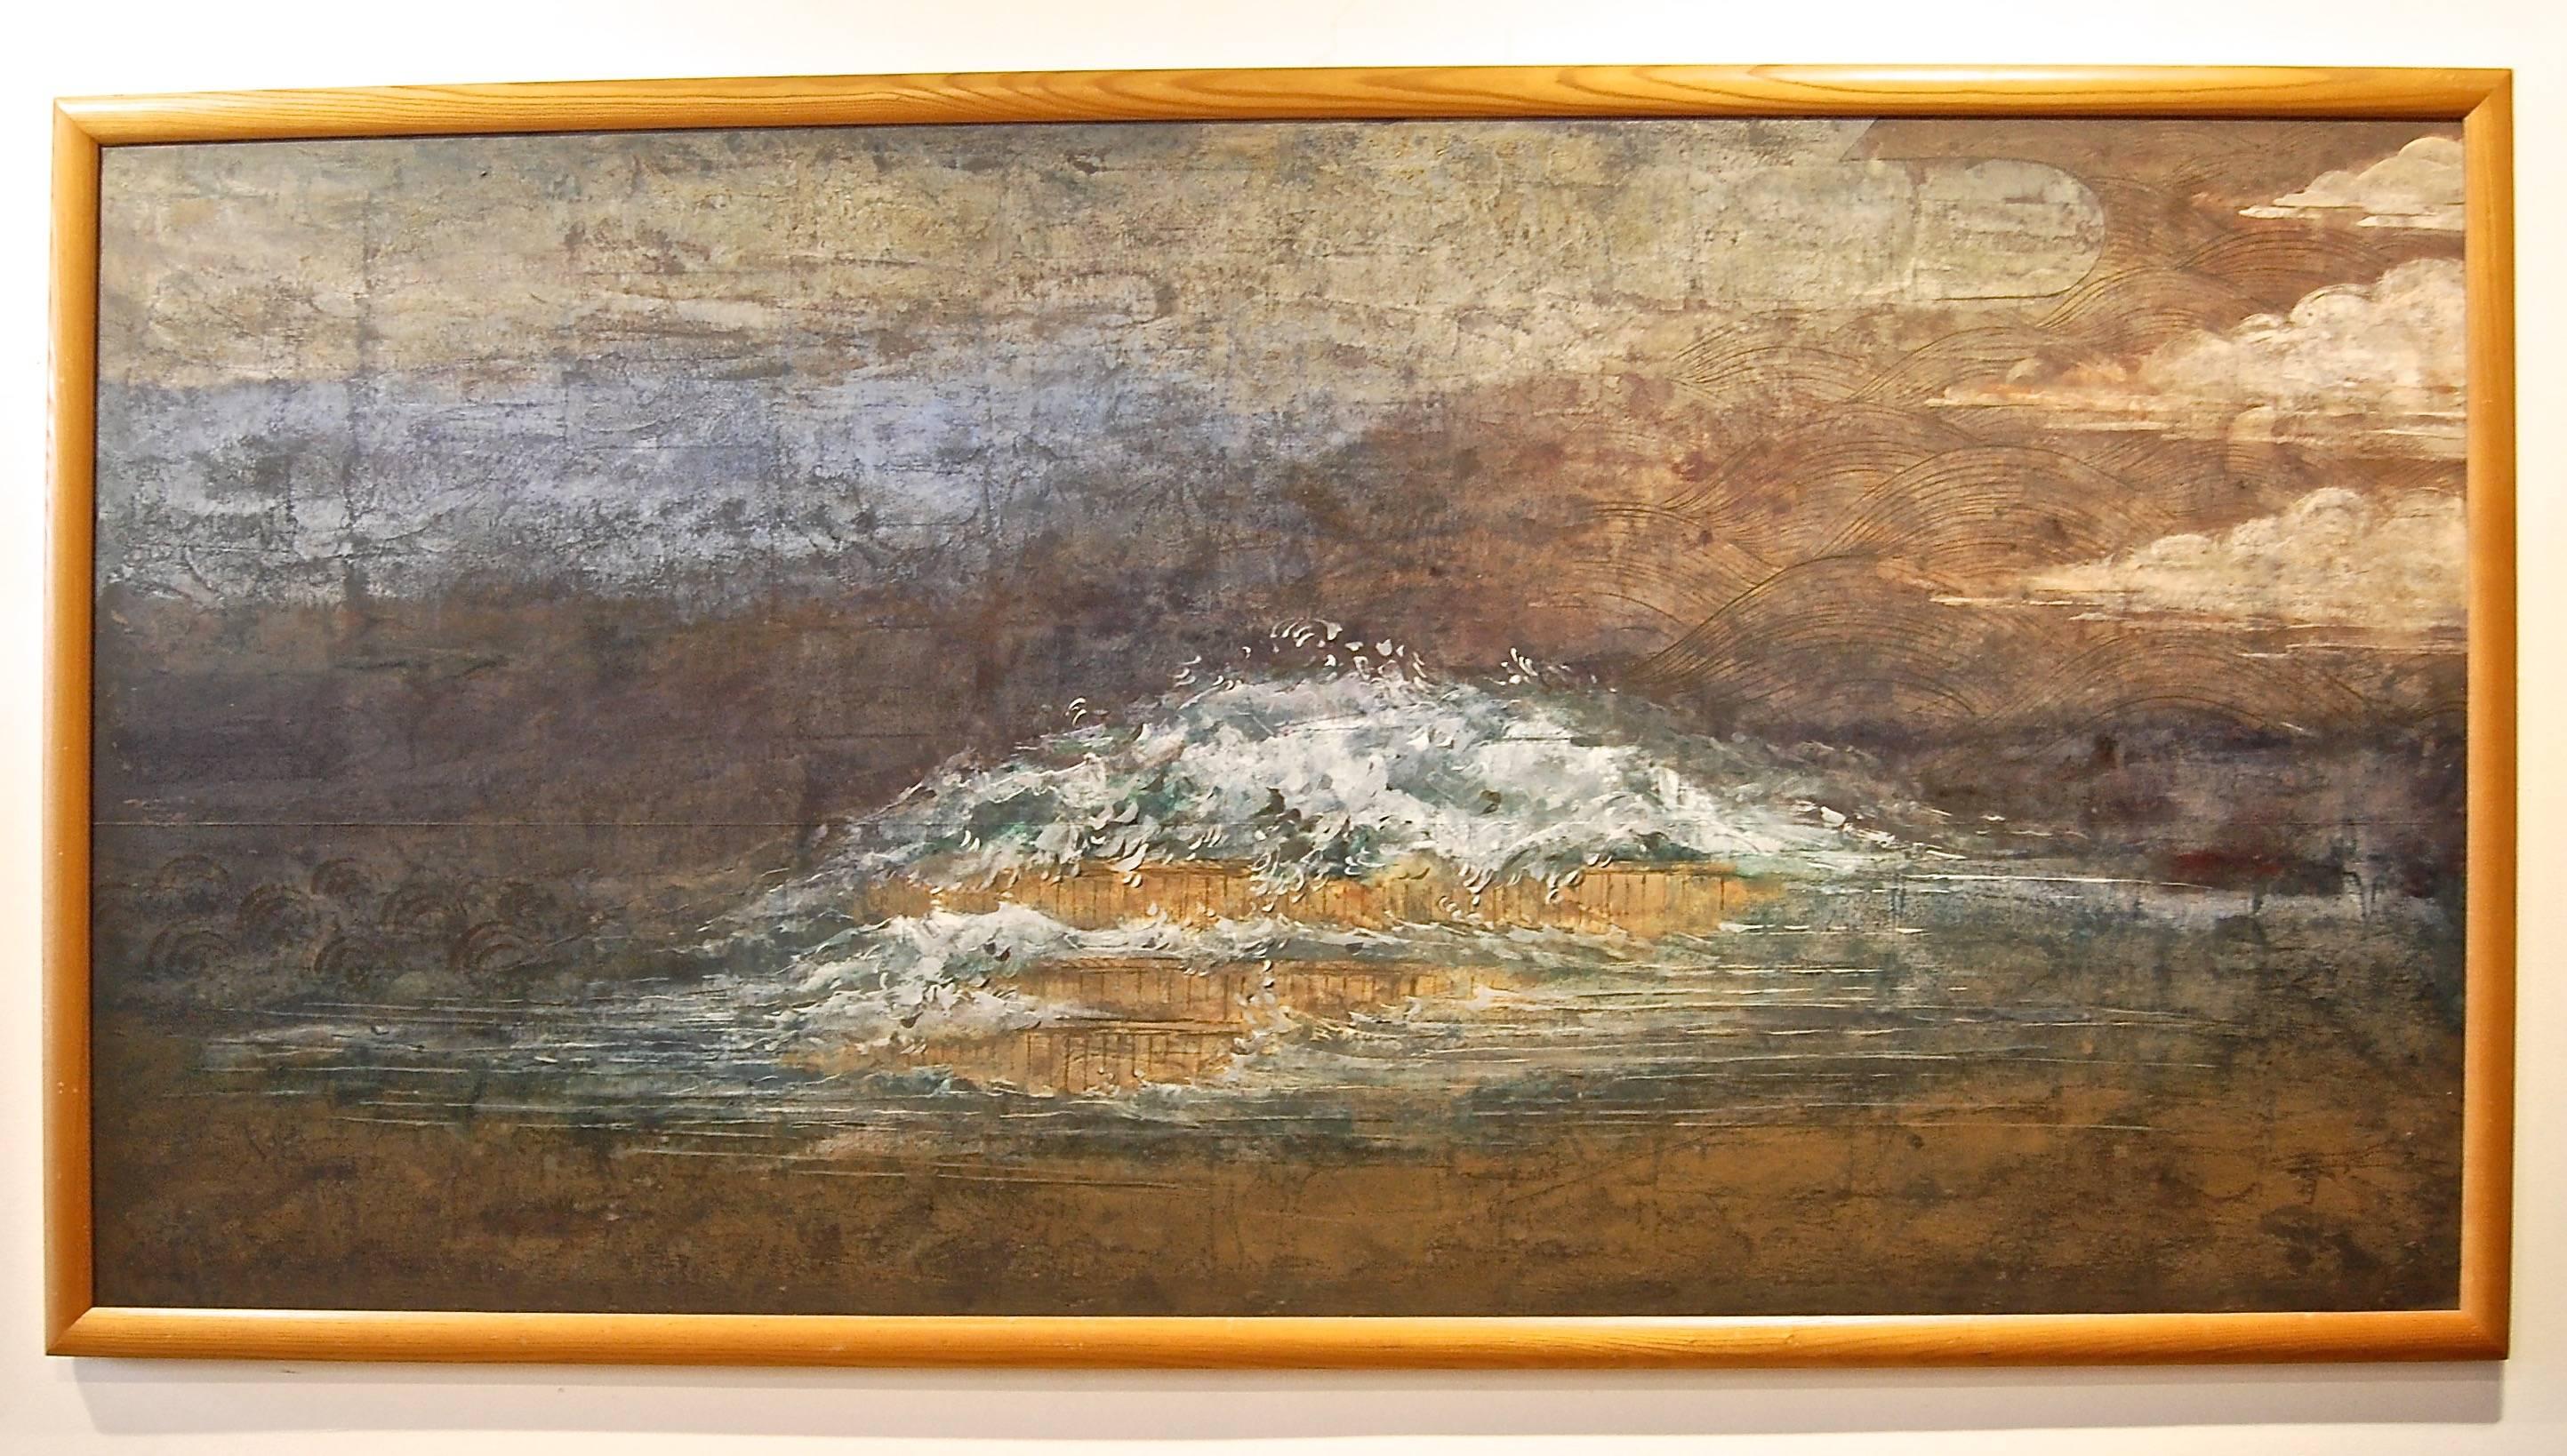 
 Wave.
 Asian possible Japanese Ink and Wash On Paper laid on artist board, signed, about 1960-70s, framed 51'x100x1.5.
